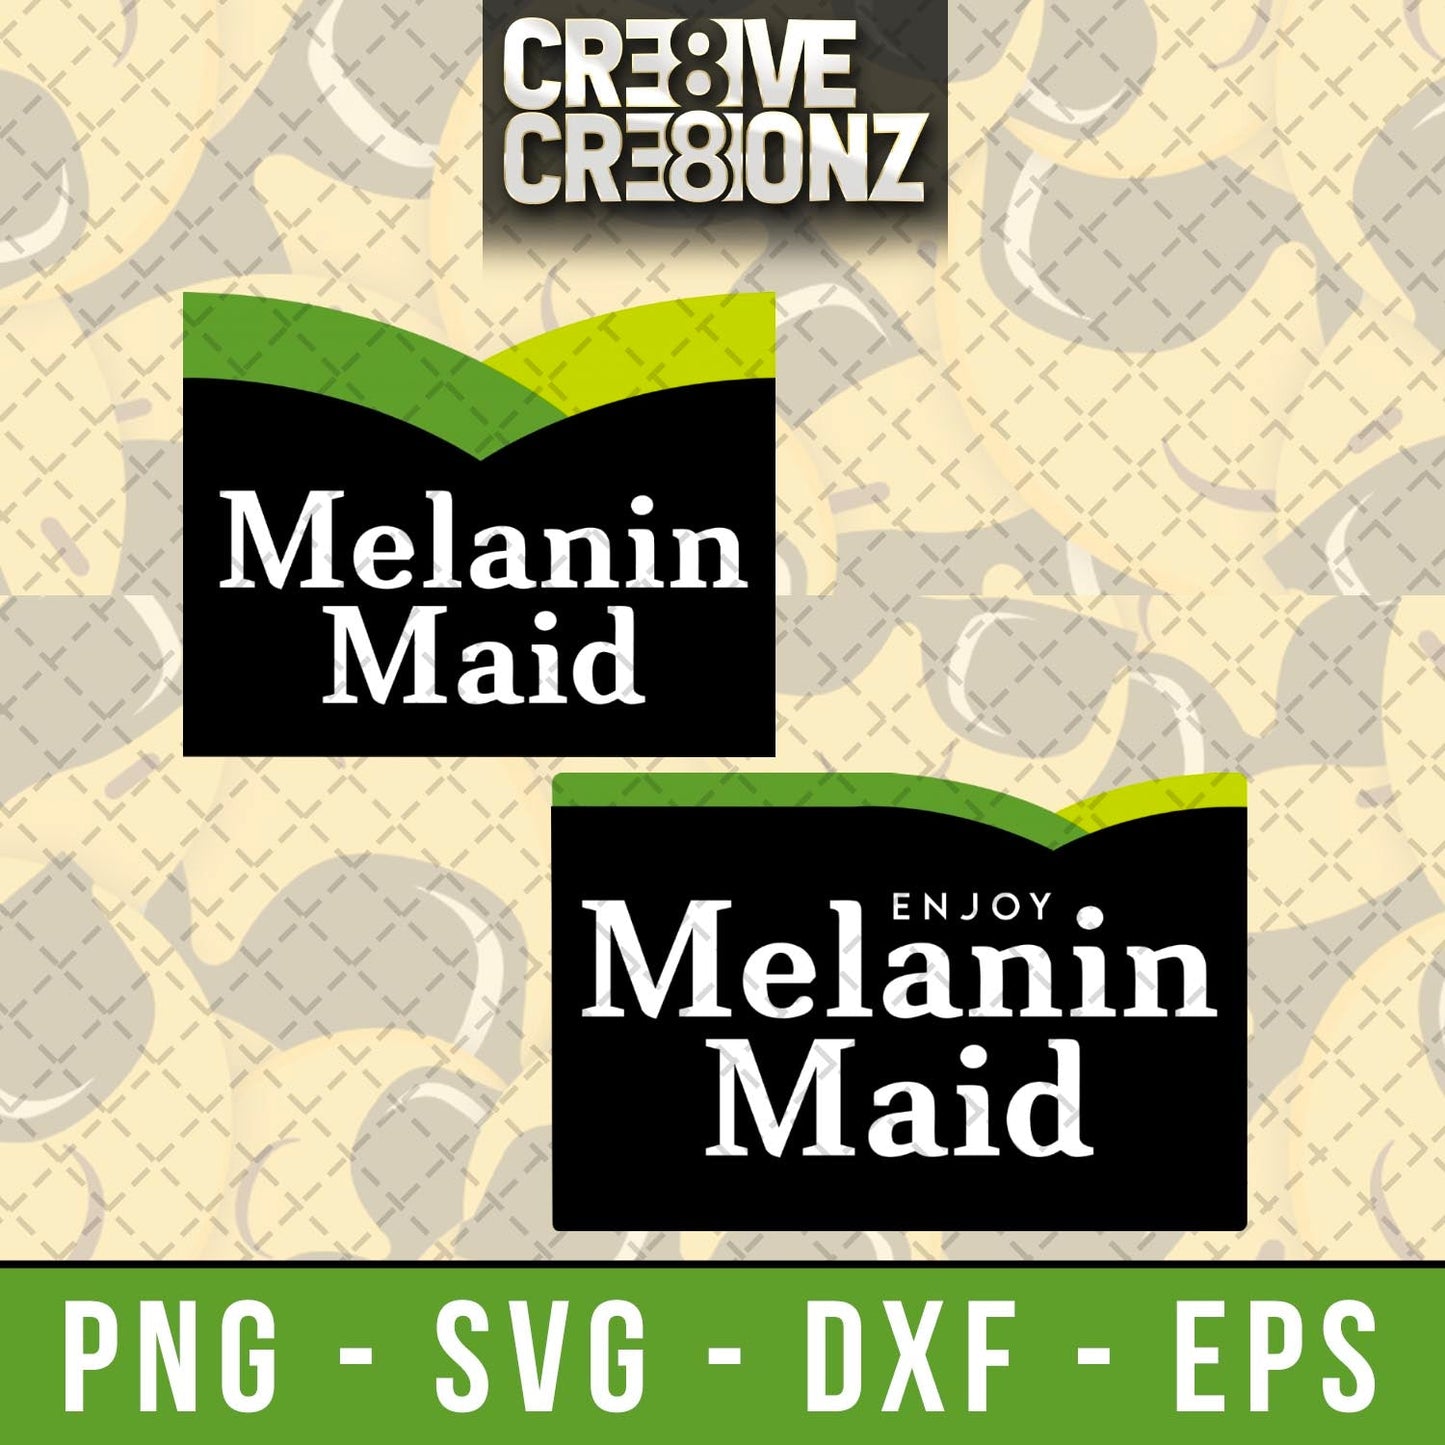 Parody Melanin Made SVG - Cre8ive Cre8ionz